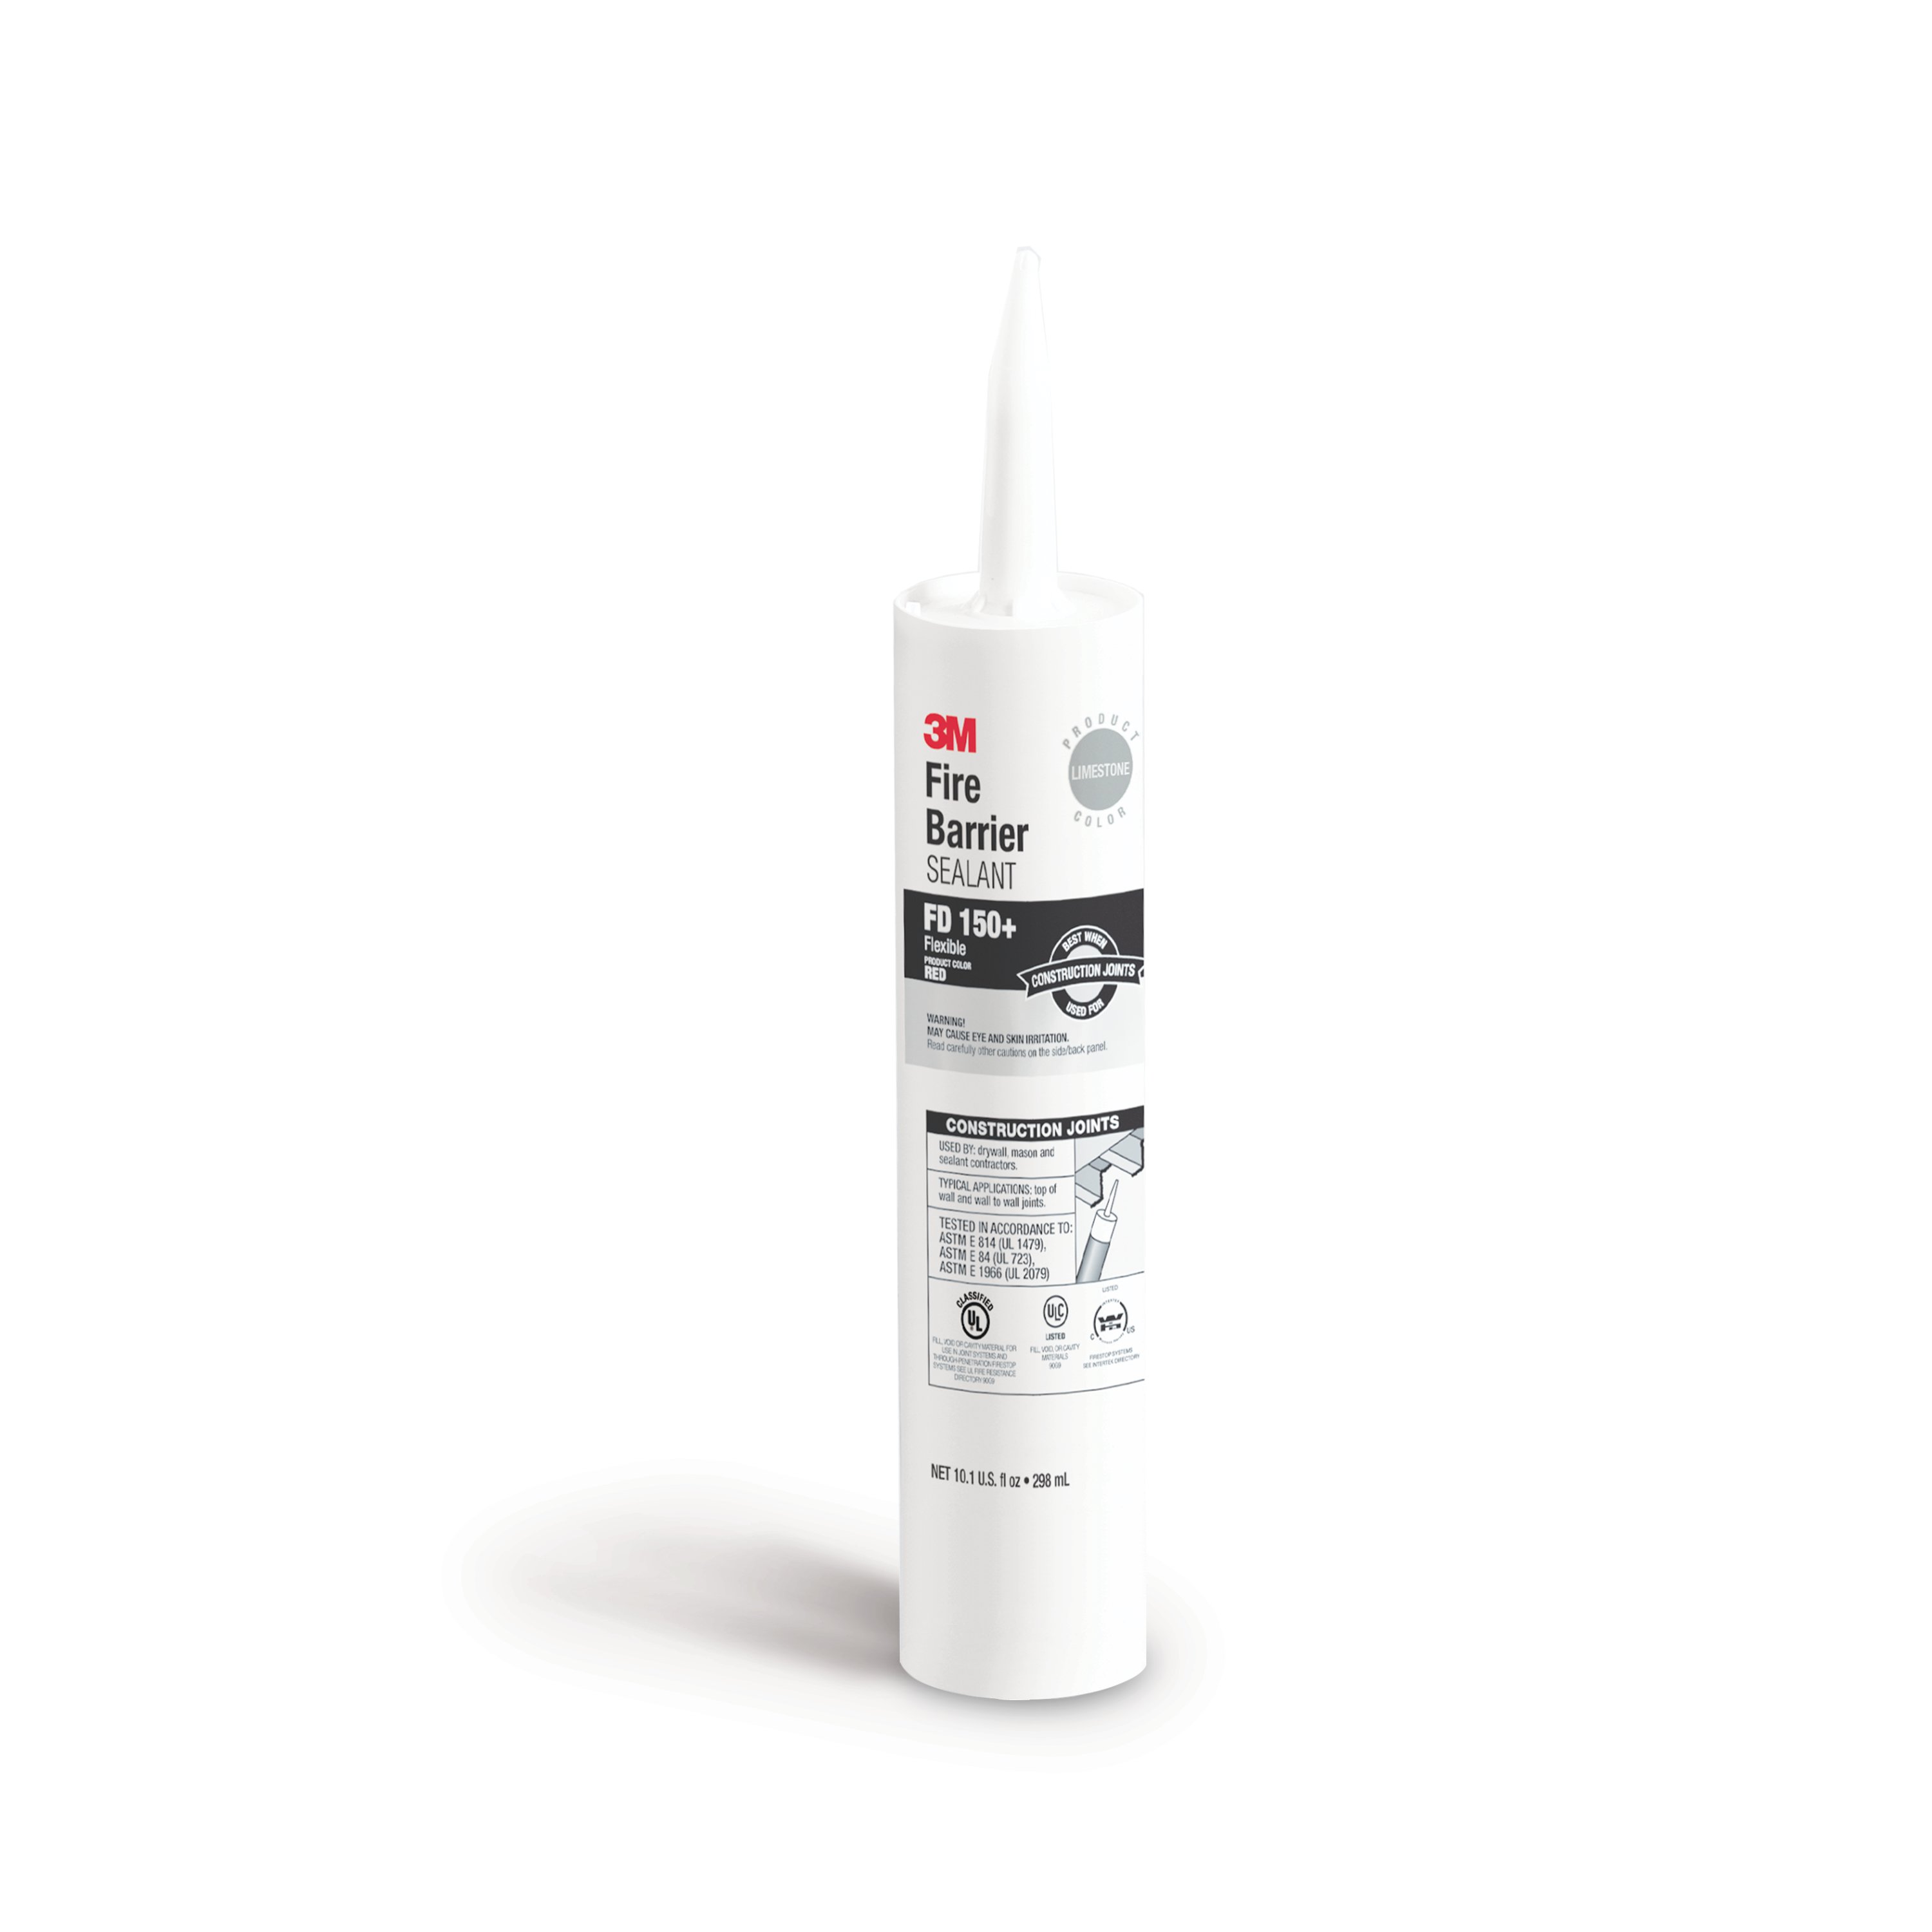 3M™ Fire Barrier Sealant FD 150+ is an economical alternative to firestopping applications